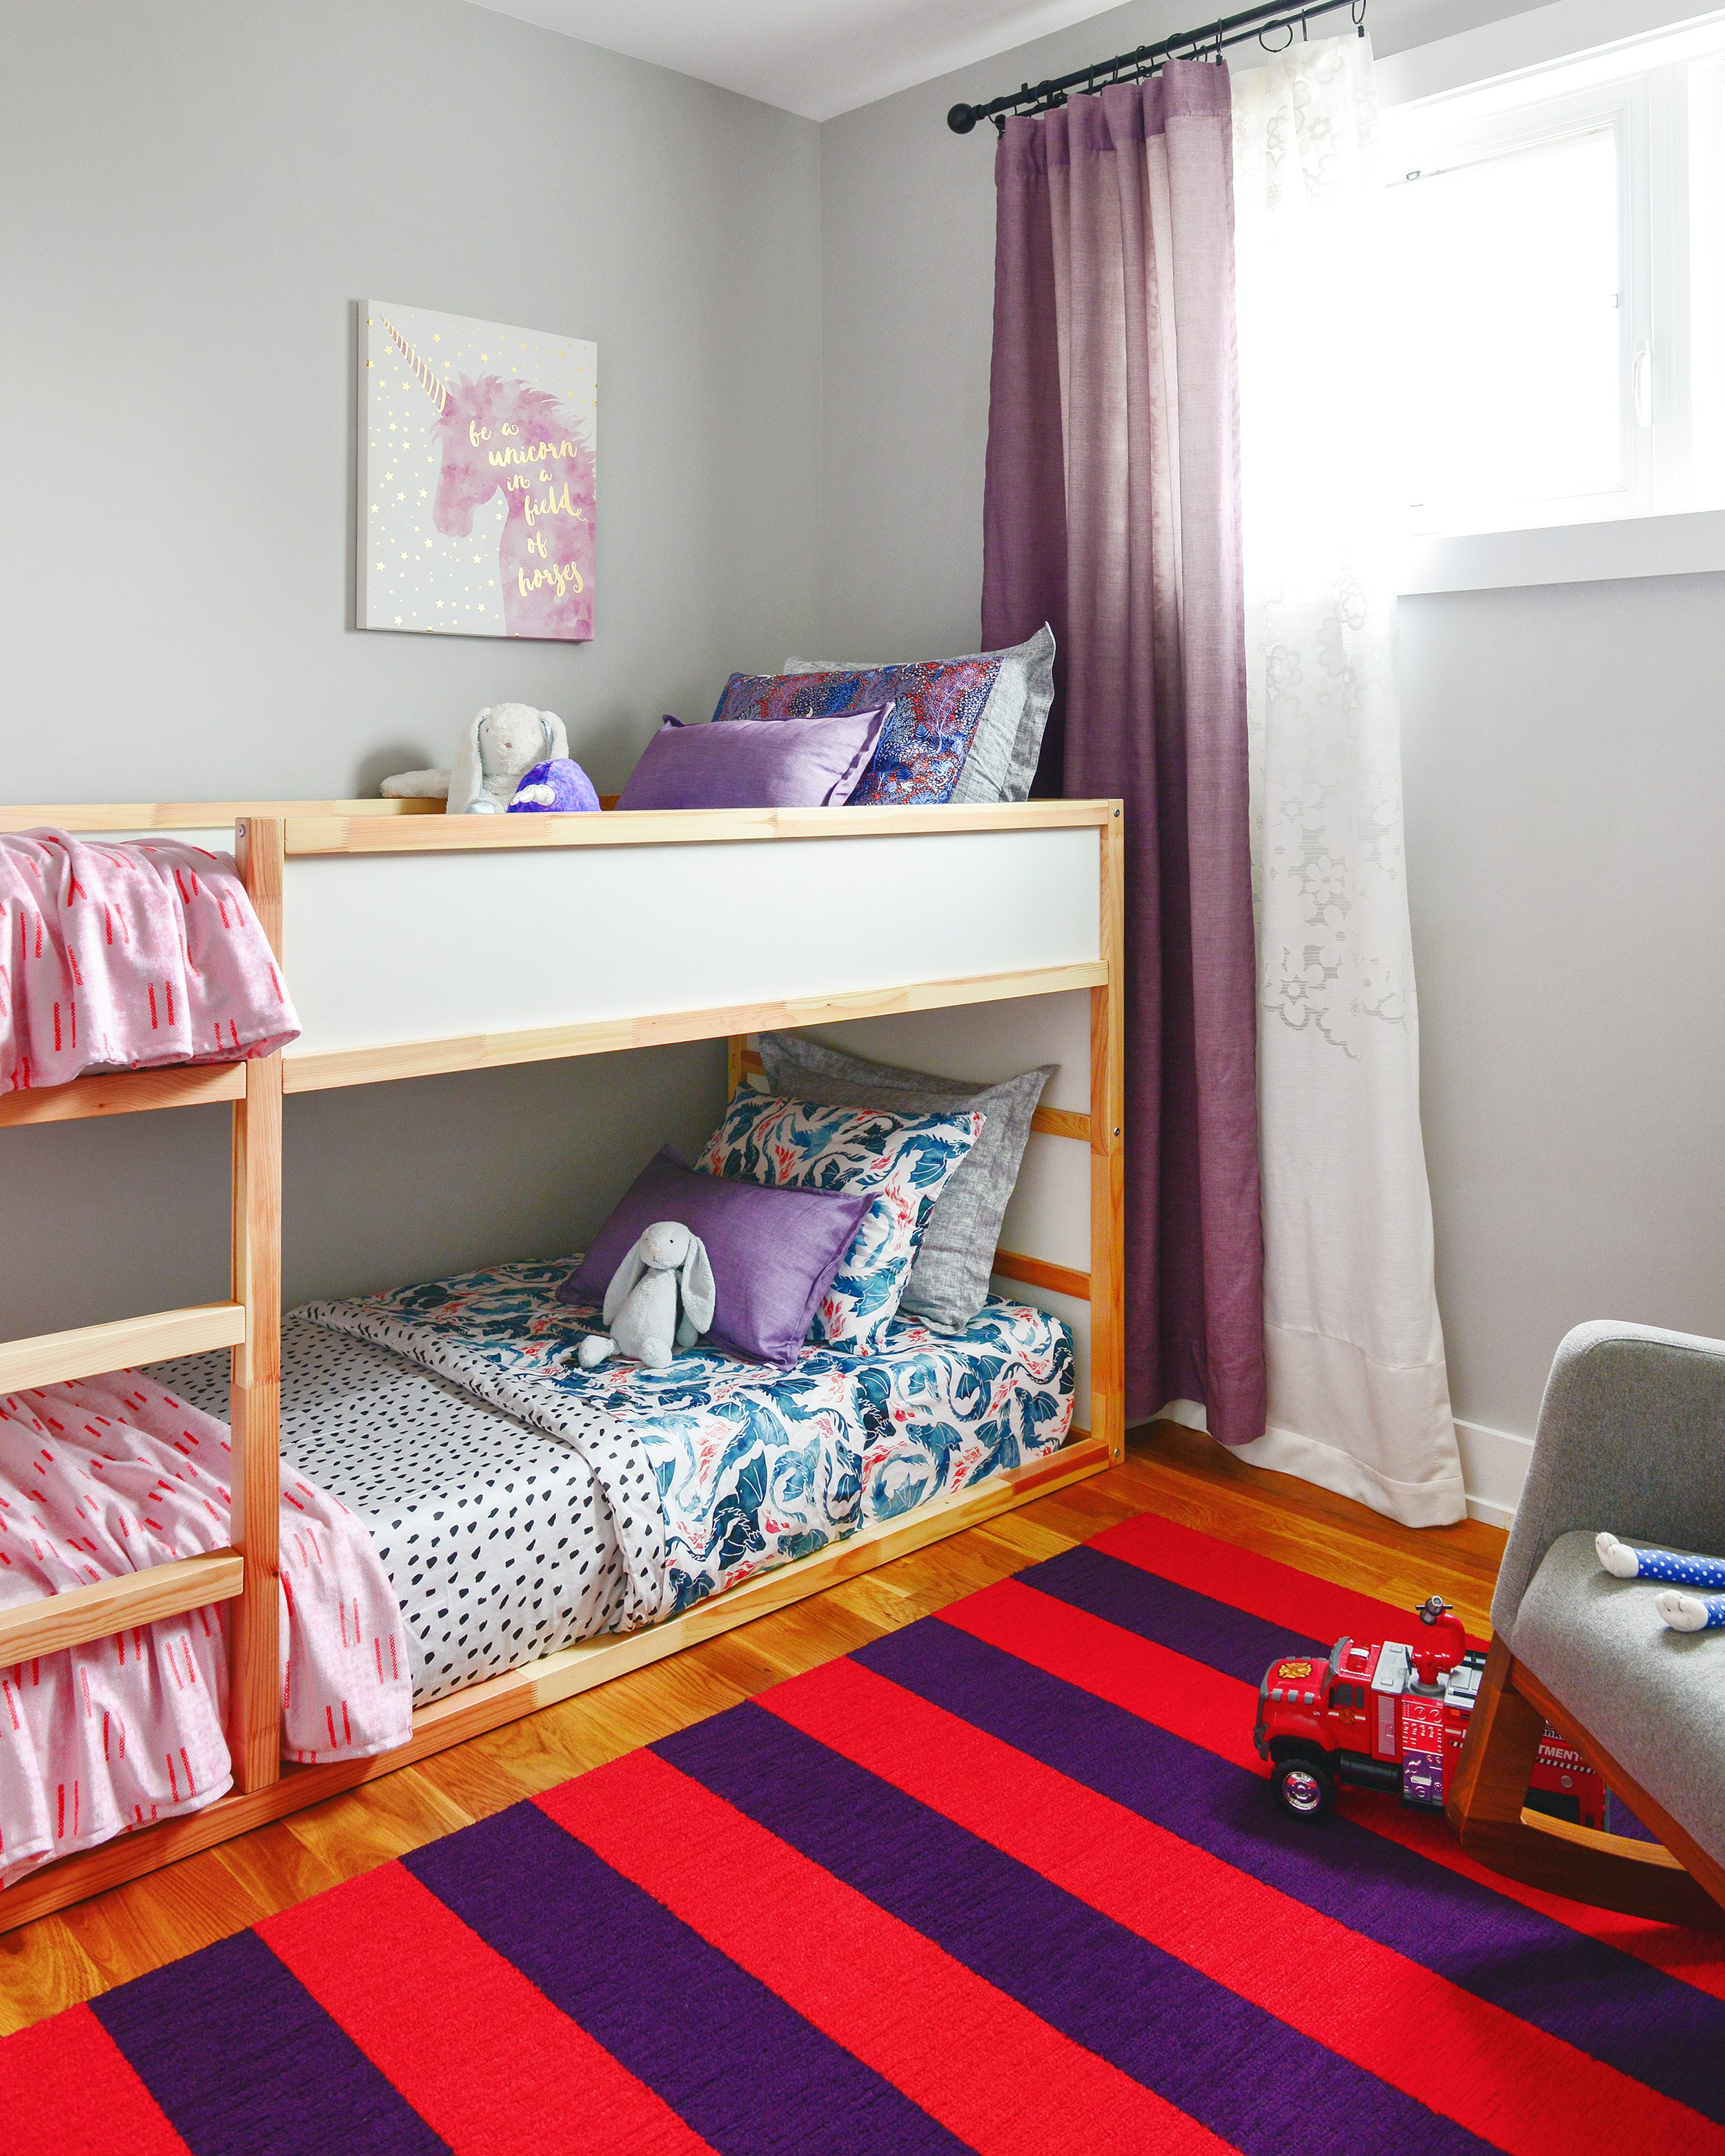 A bunk room makeover for a brother and sister in collaboration with Spoonflower! // a kids' room refresh // via Yellow Brick Home